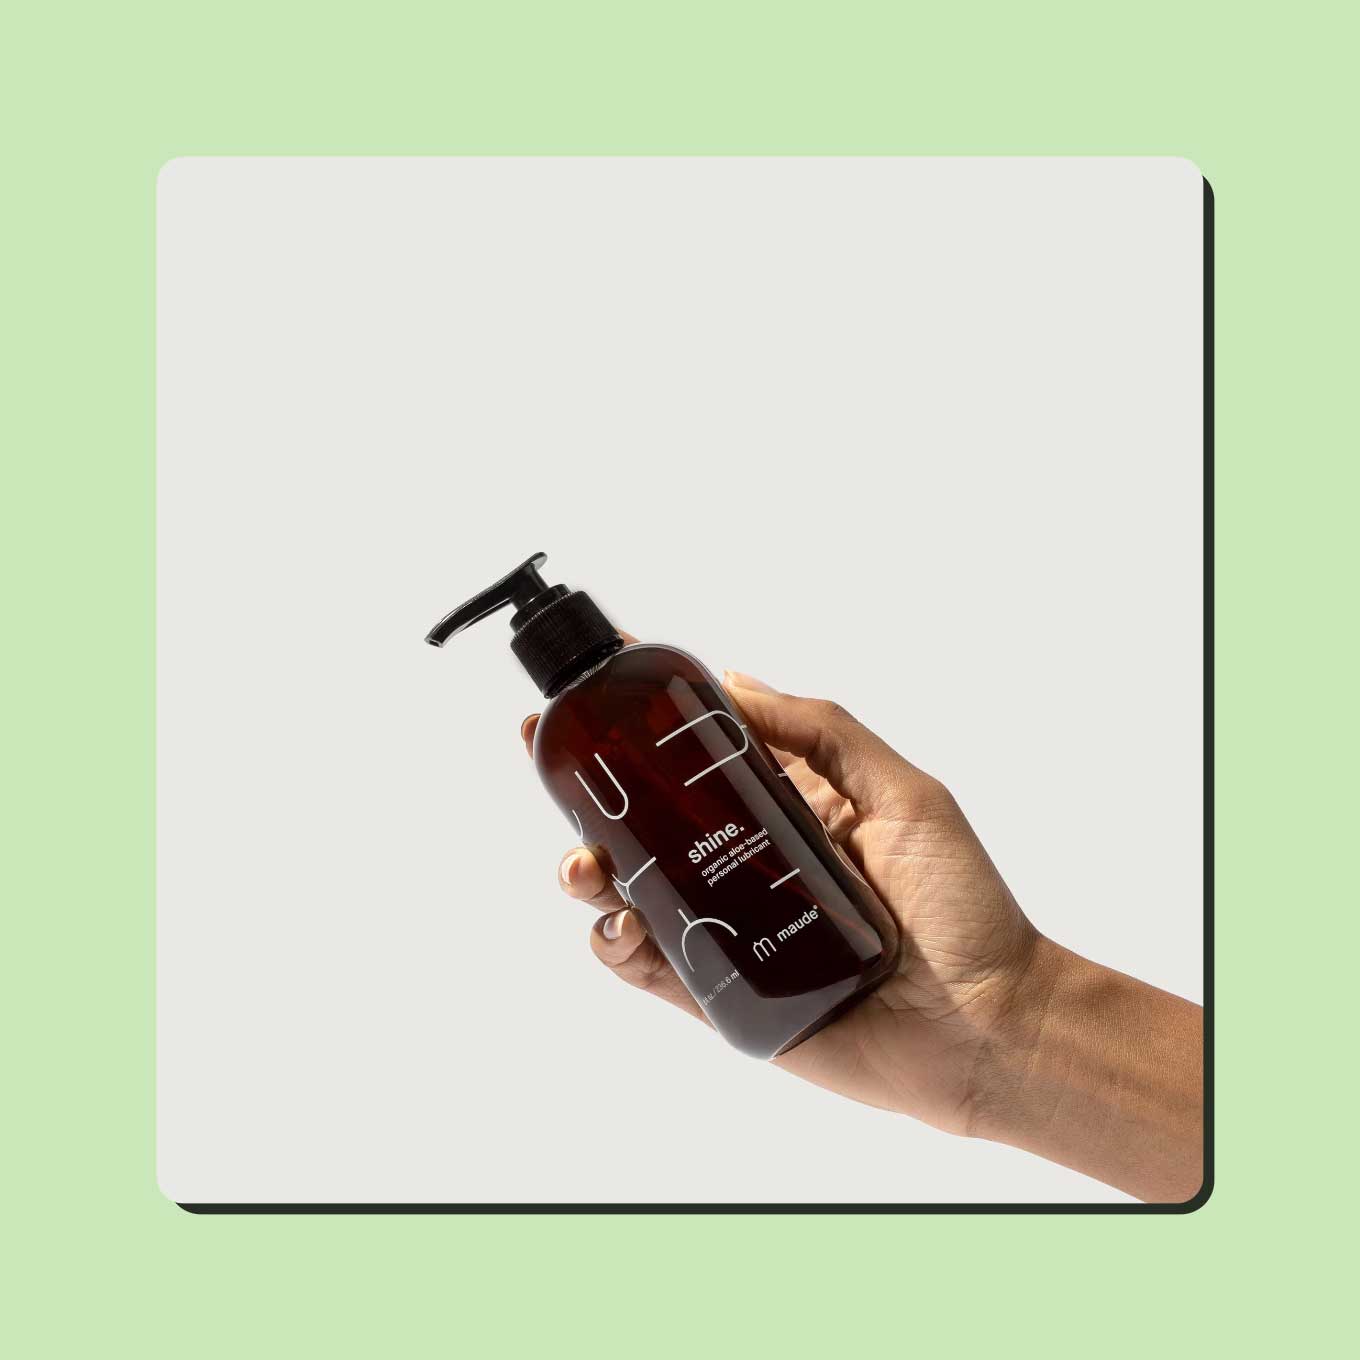 A hand holds up an amber bottle of Shine personal lubricant